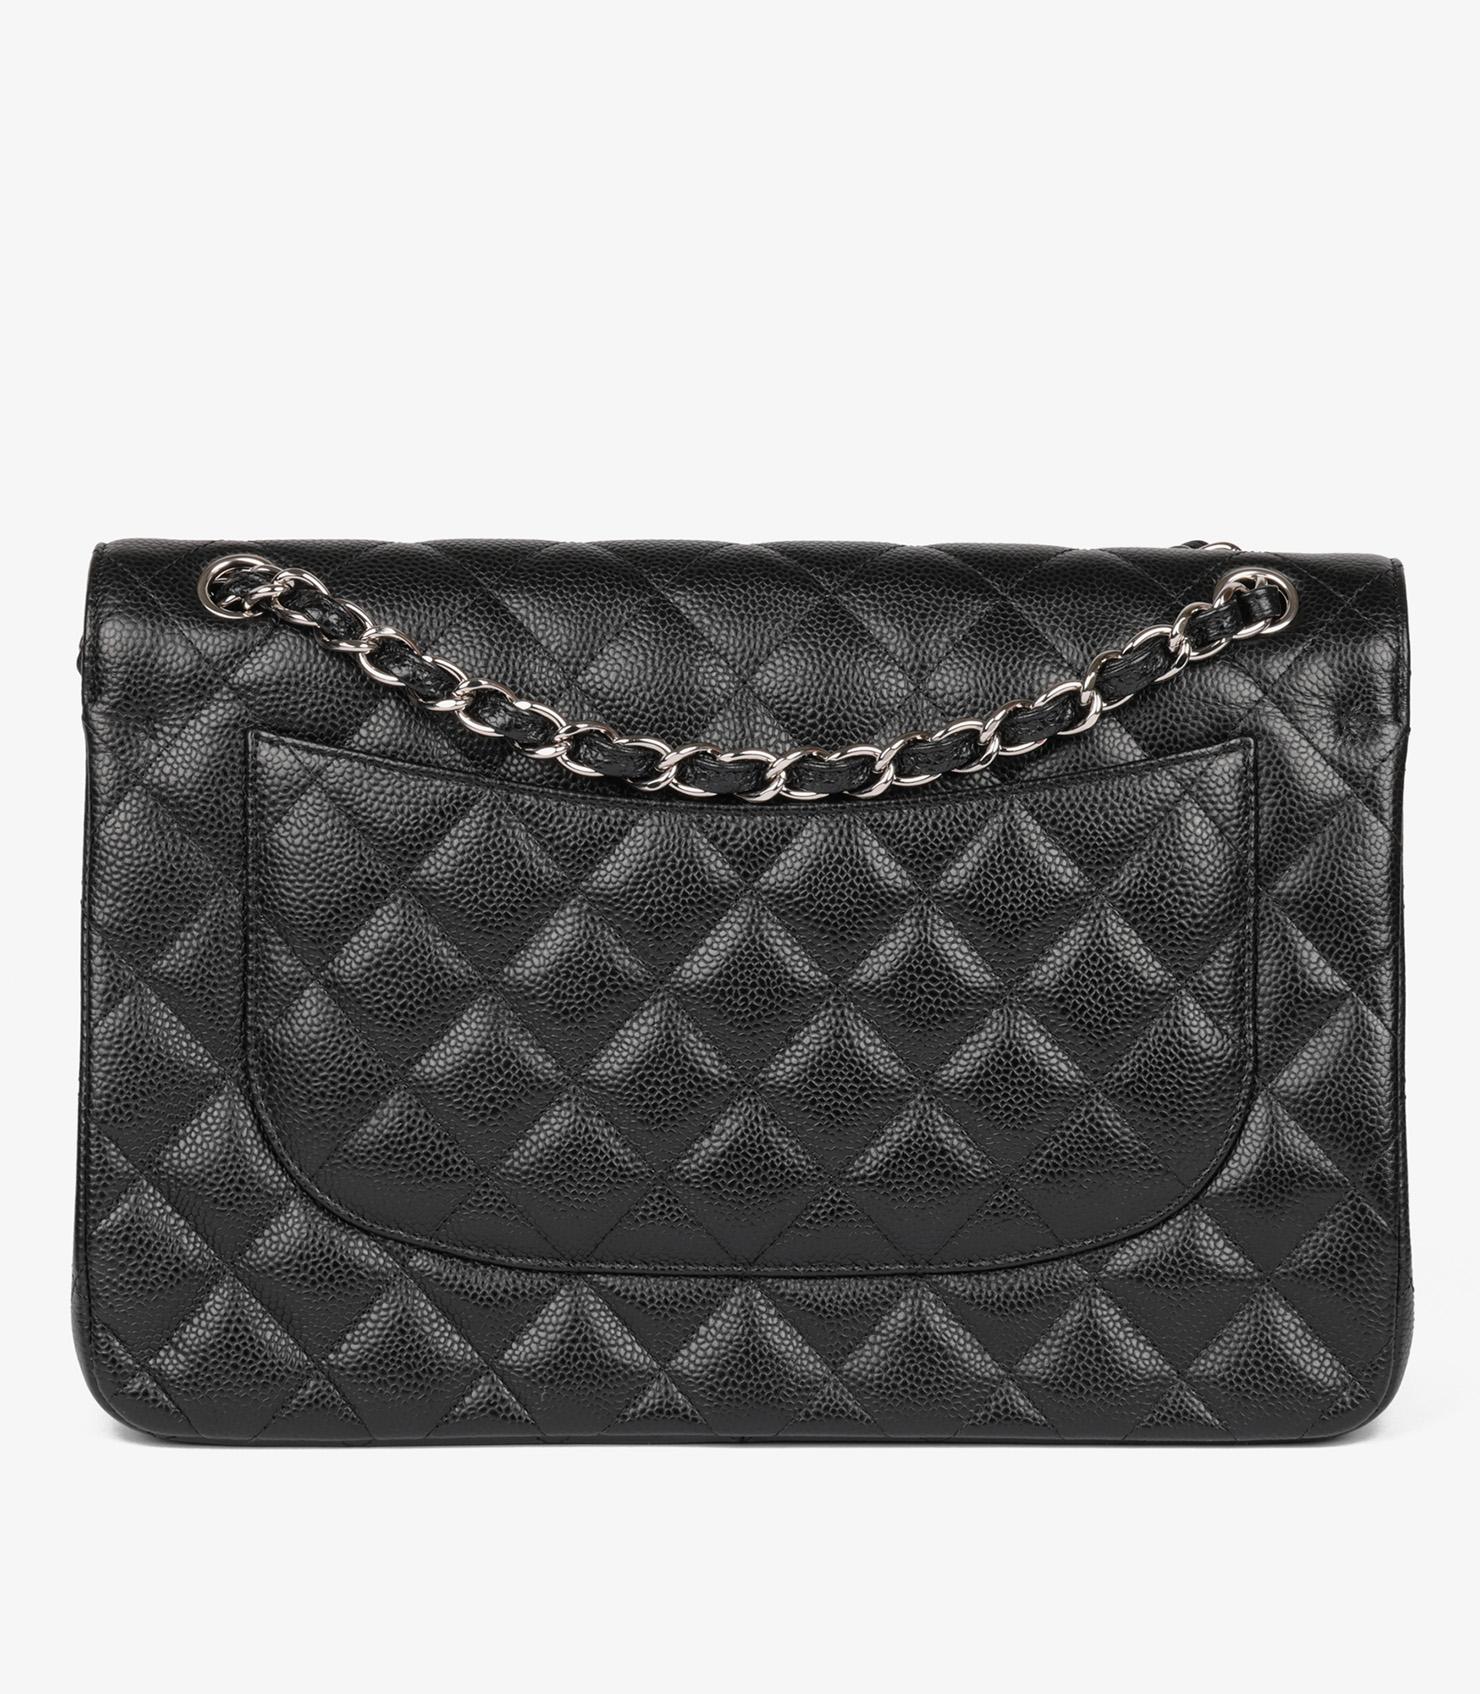 Chanel Black Caviar Leather Jumbo Classic Double Flap Bag For Sale 3